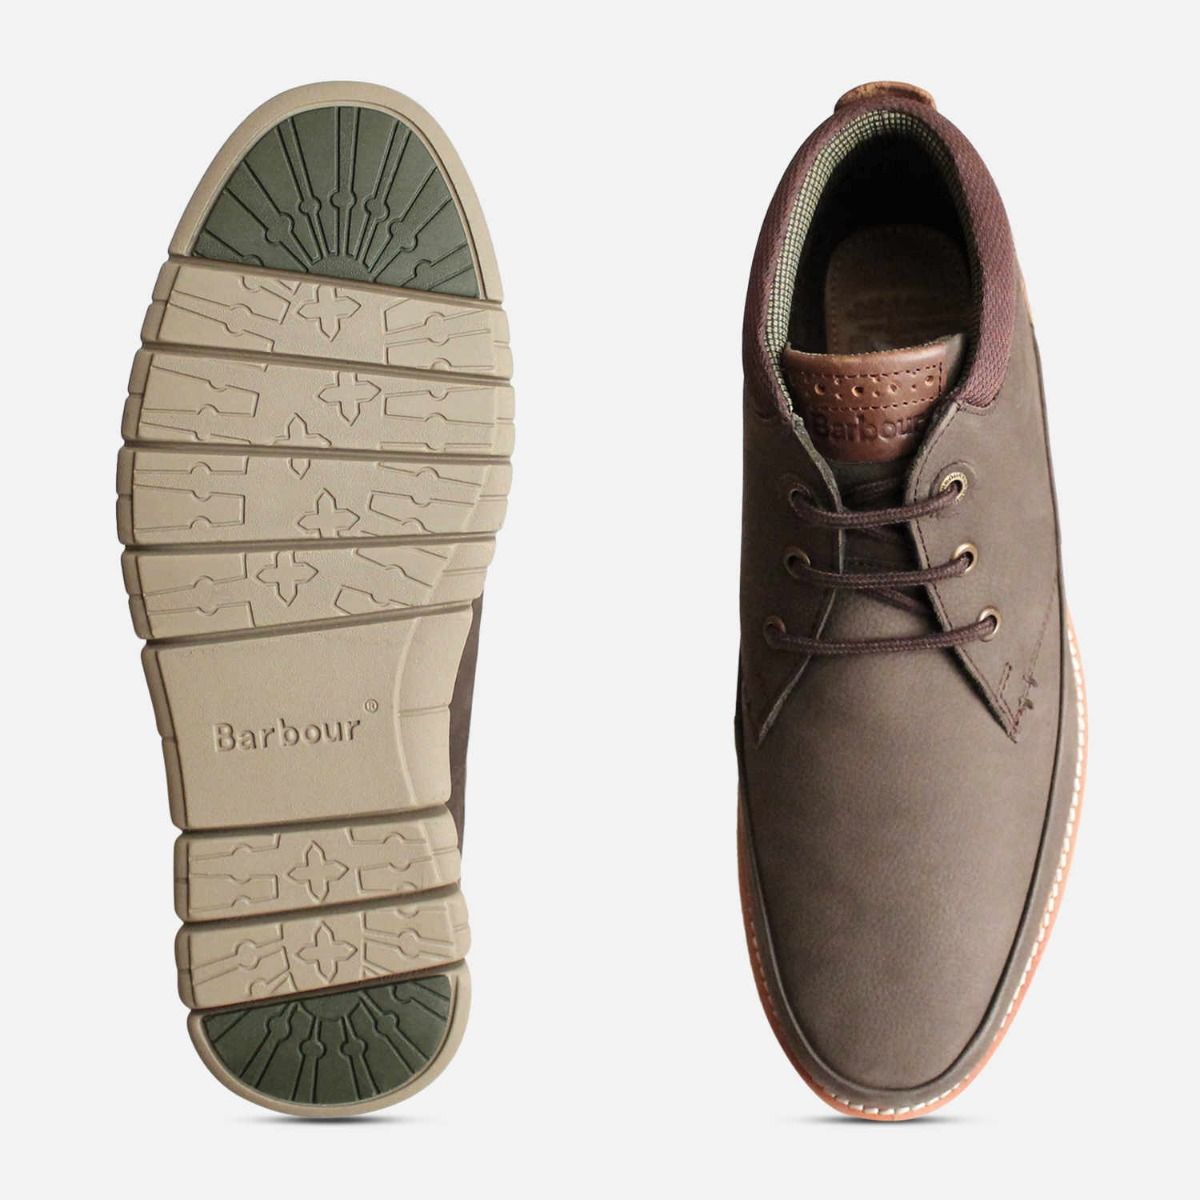 barbour nelson shoes